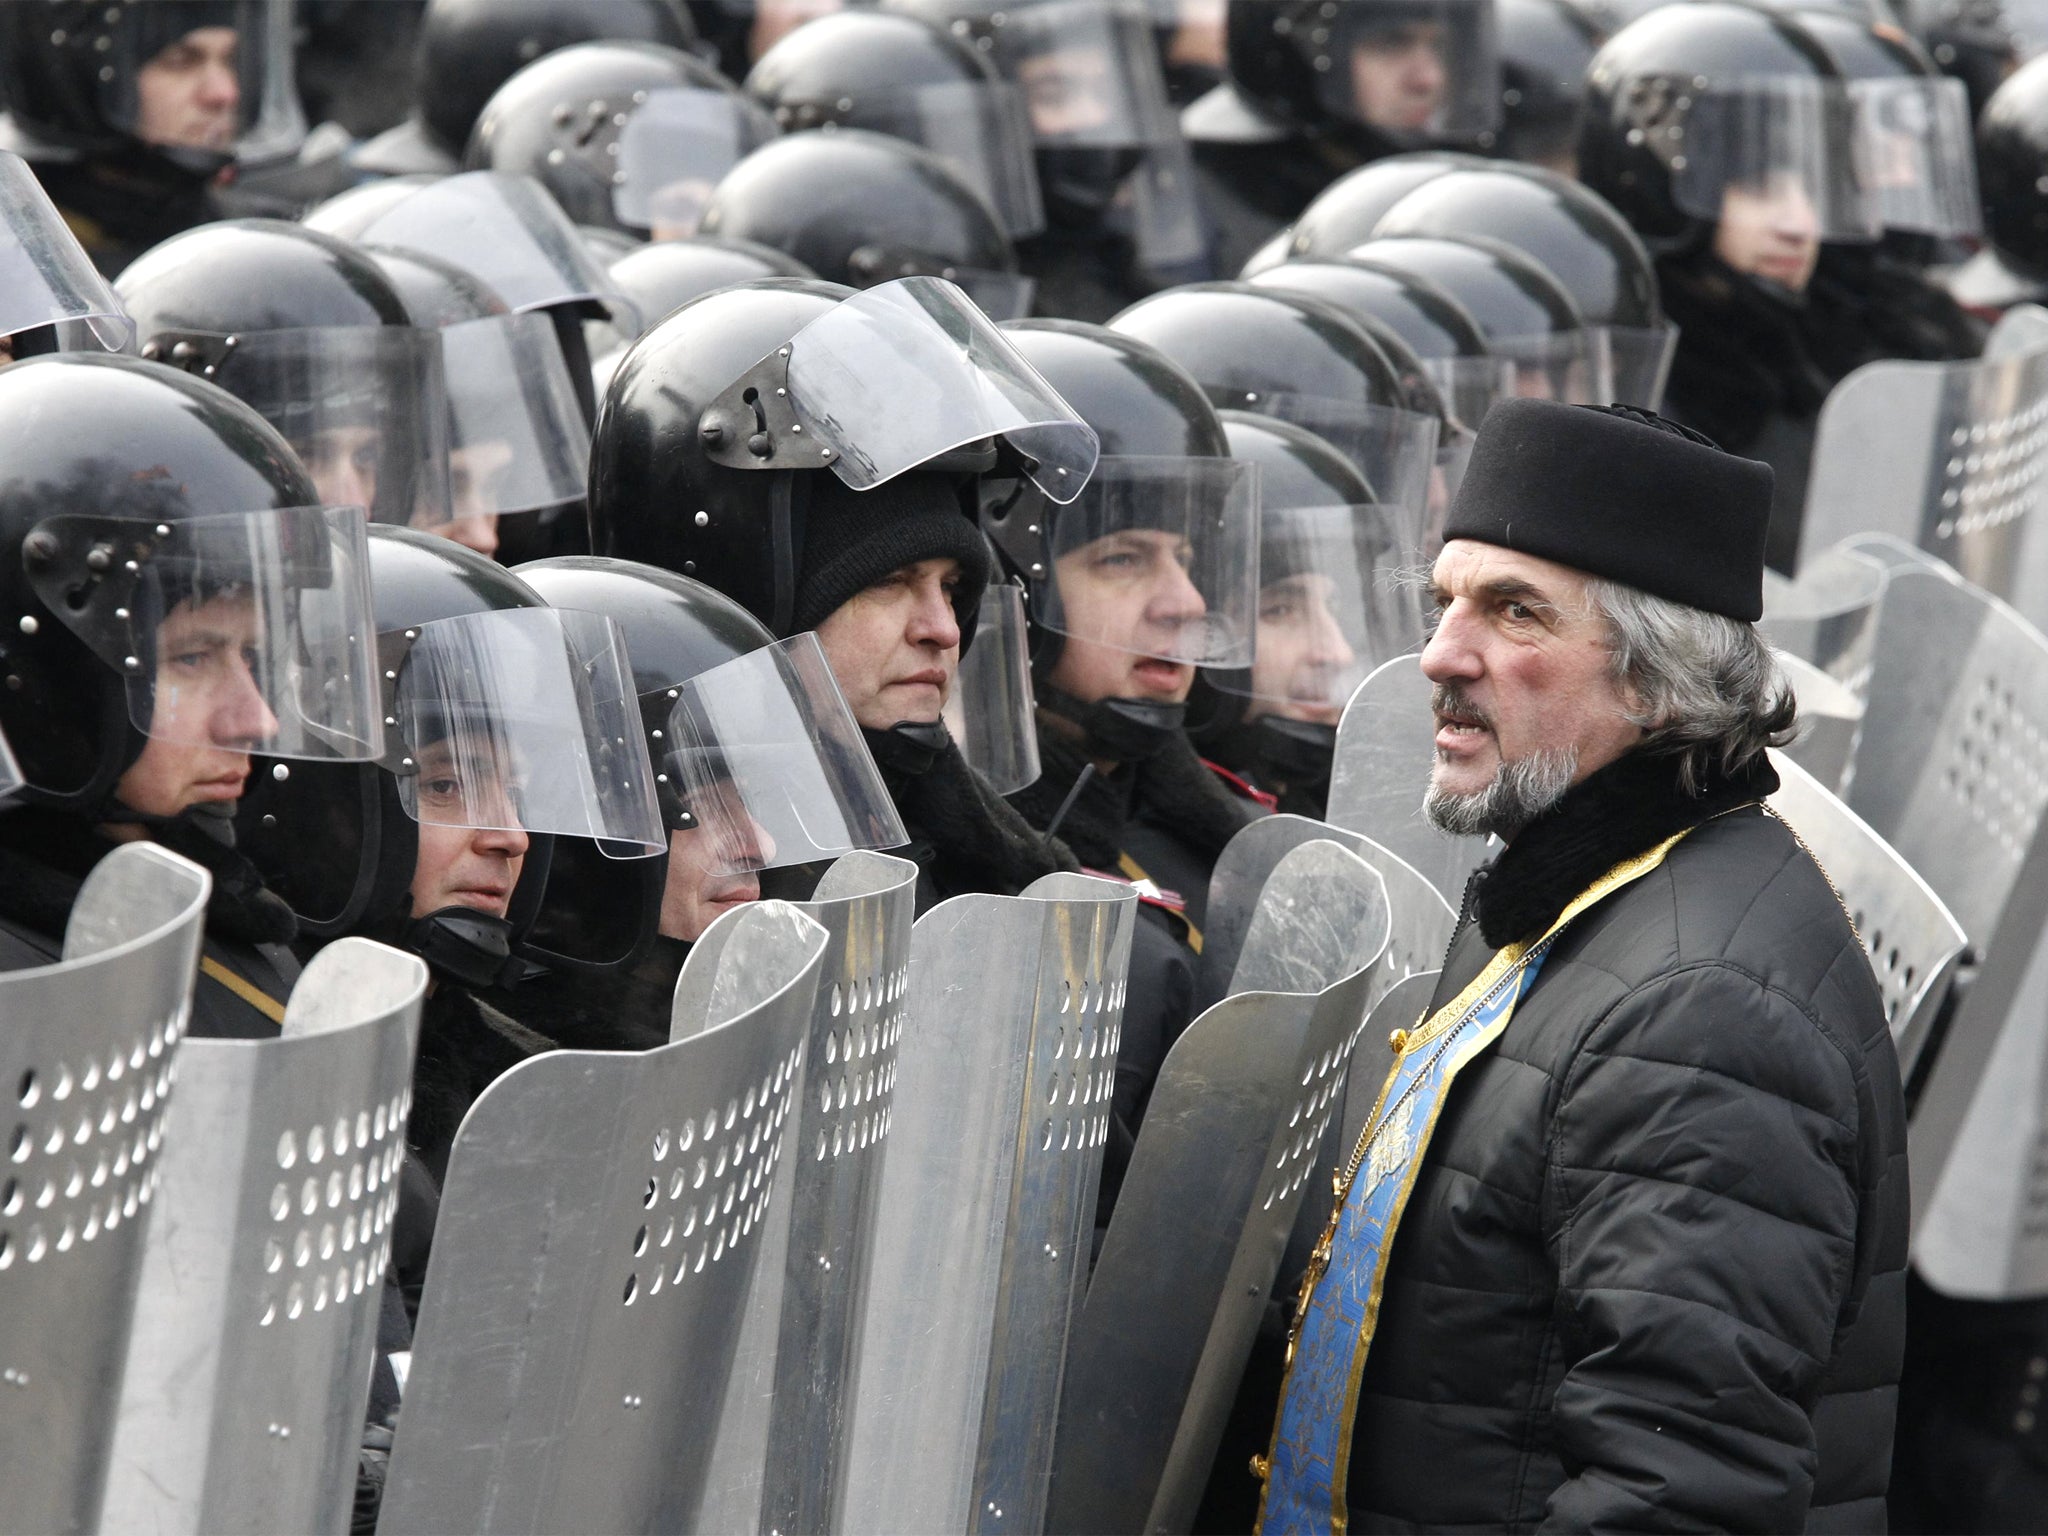 A clergyman opposes riot police in Kiev during a rally held by pro-European integration demonstrators.